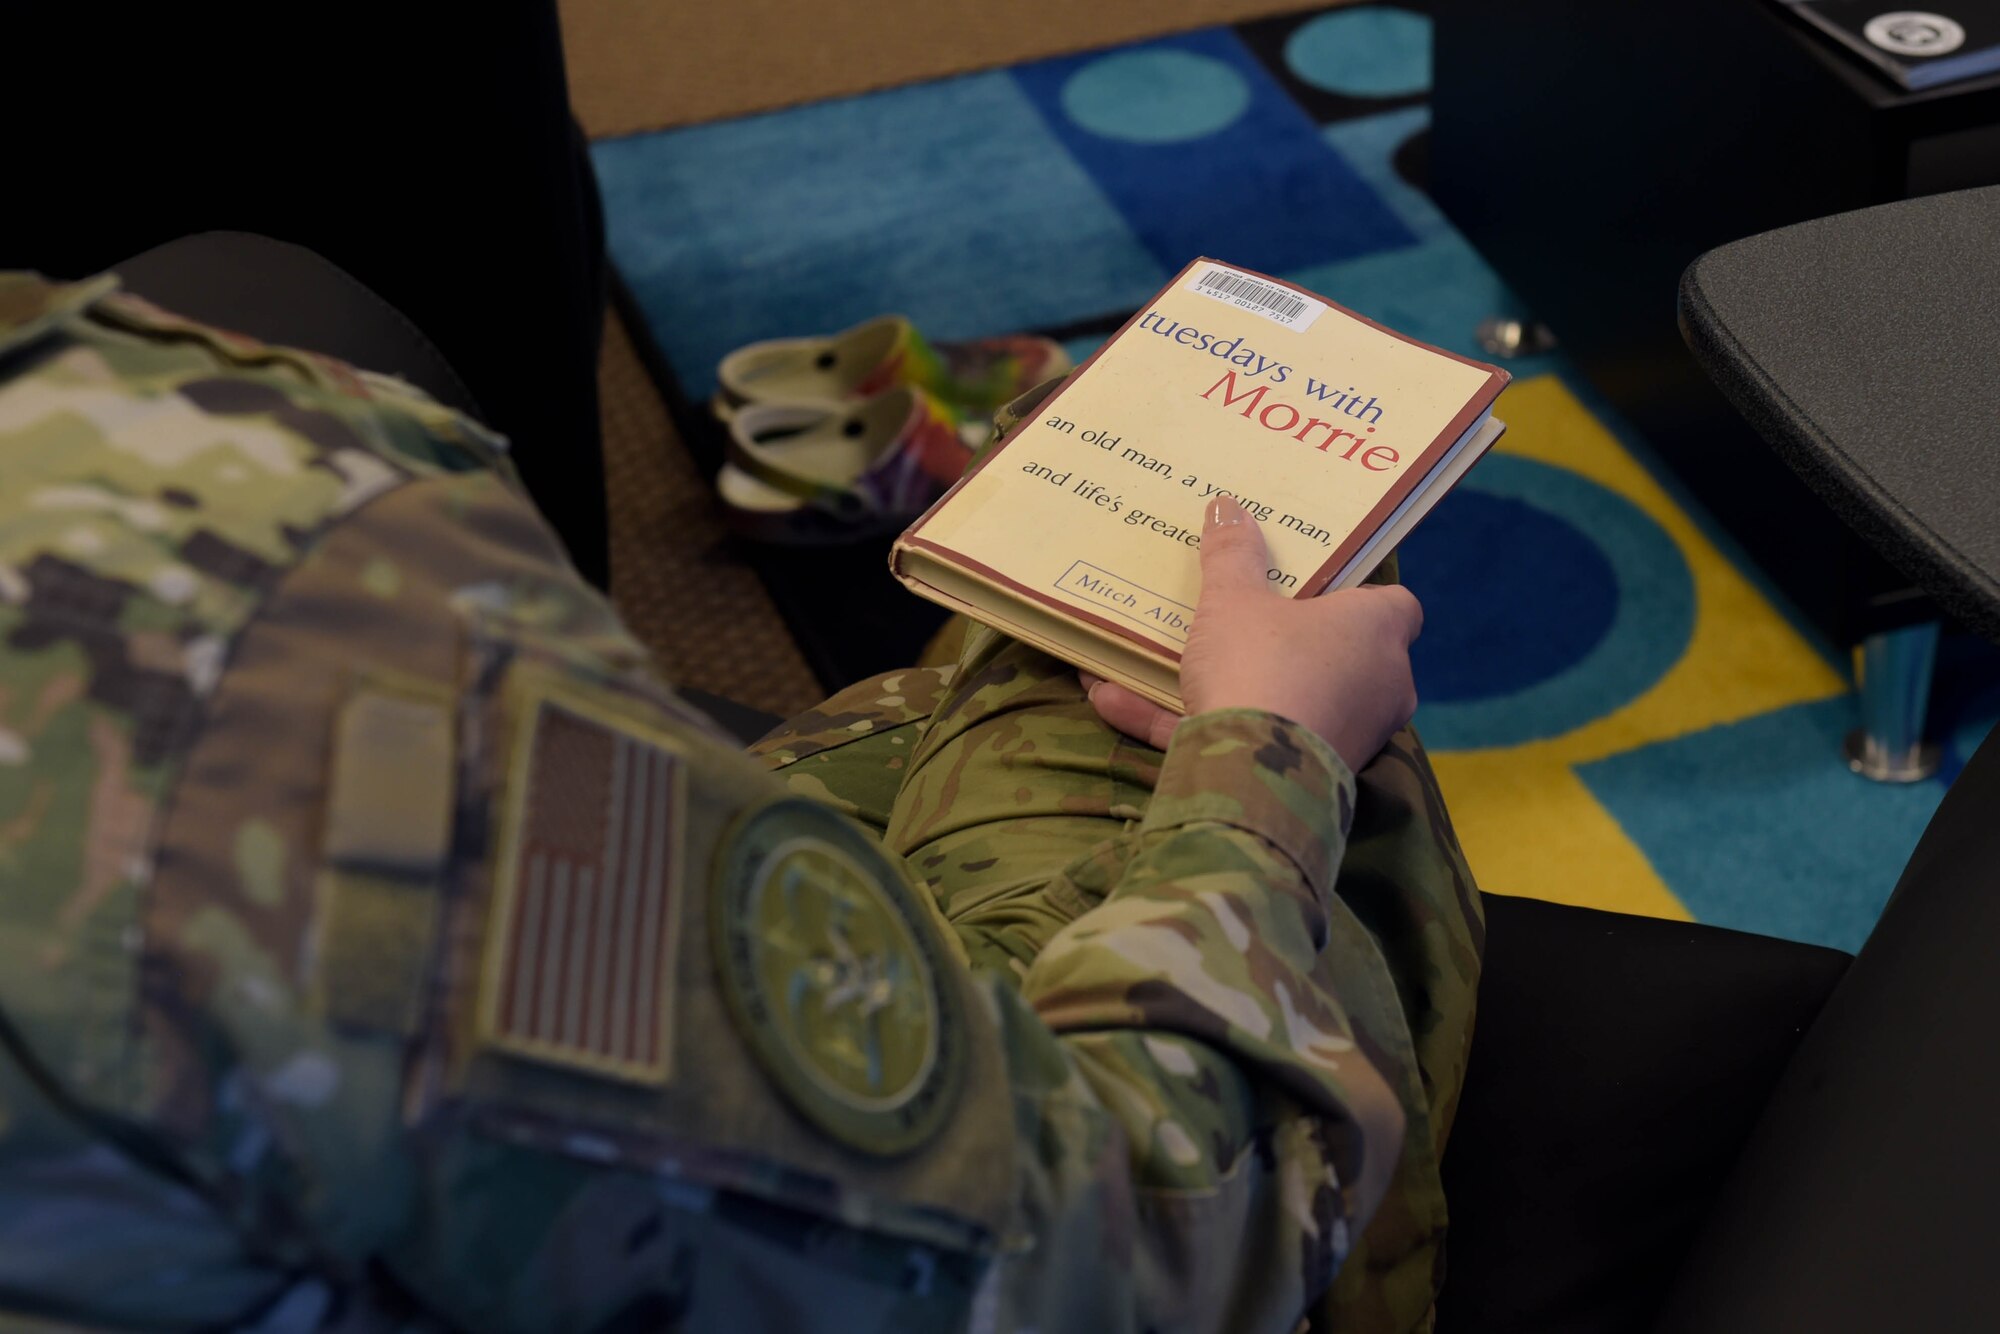 A photo of a book on an Airman's lap.